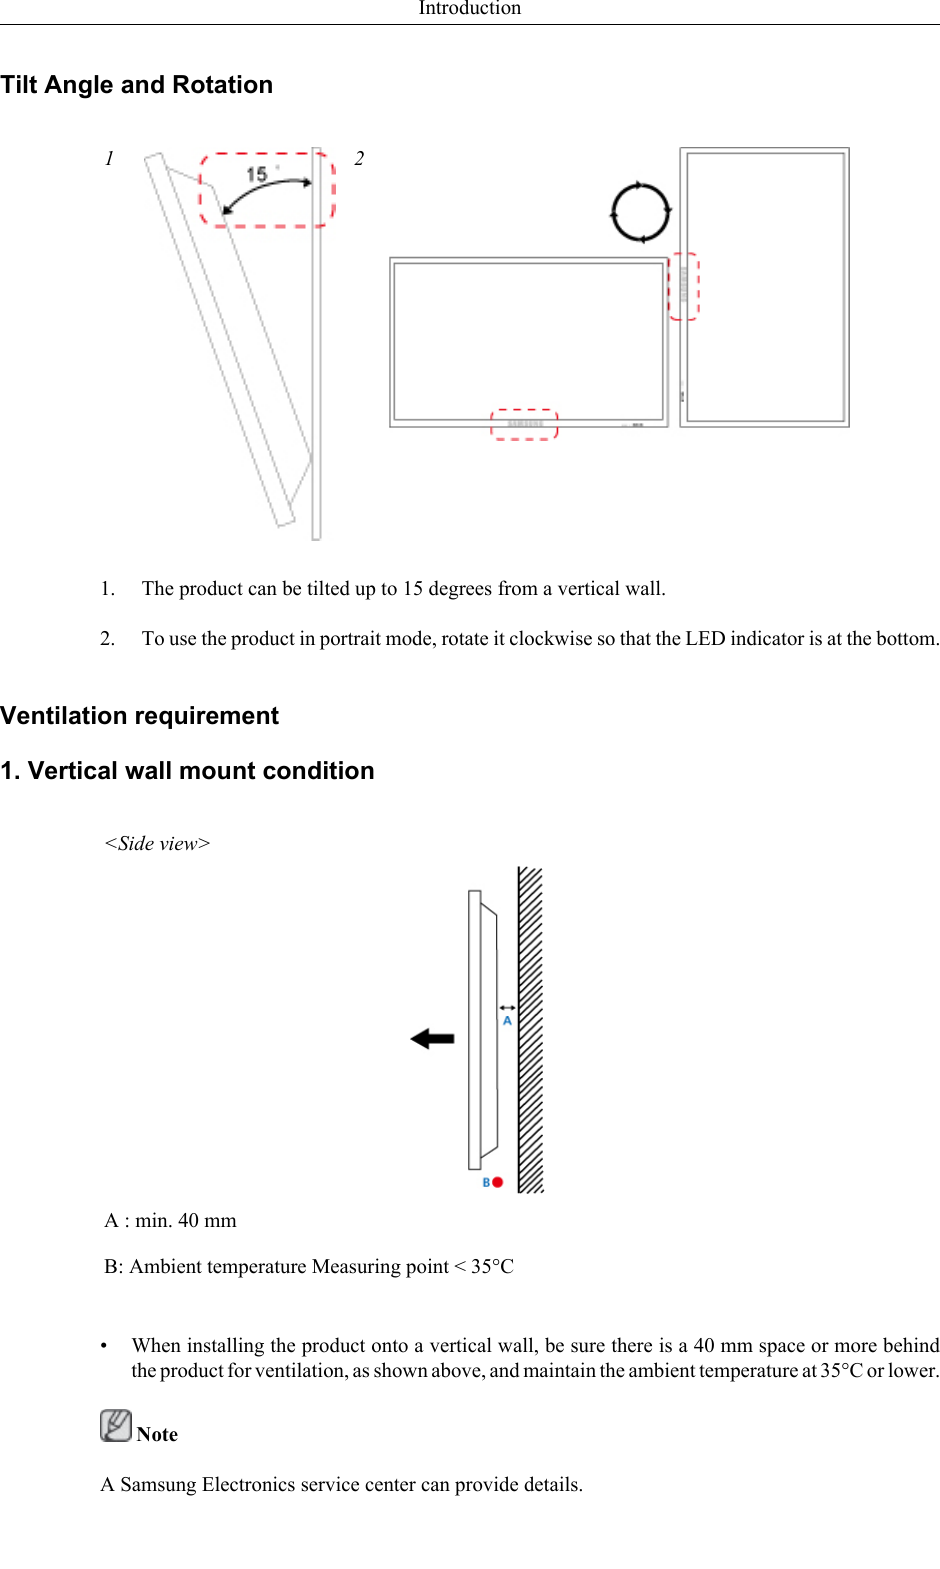 Tilt Angle and Rotation1 21. The product can be tilted up to 15 degrees from a vertical wall.2. To use the product in portrait mode, rotate it clockwise so that the LED indicator is at the bottom.Ventilation requirement1. Vertical wall mount condition&lt;Side view&gt;A : min. 40 mmB: Ambient temperature Measuring point &lt; 35°C• When installing the product onto a vertical wall, be sure there is a 40 mm space or more behindthe product for ventilation, as shown above, and maintain the ambient temperature at 35°C or lower. NoteA Samsung Electronics service center can provide details.Introduction